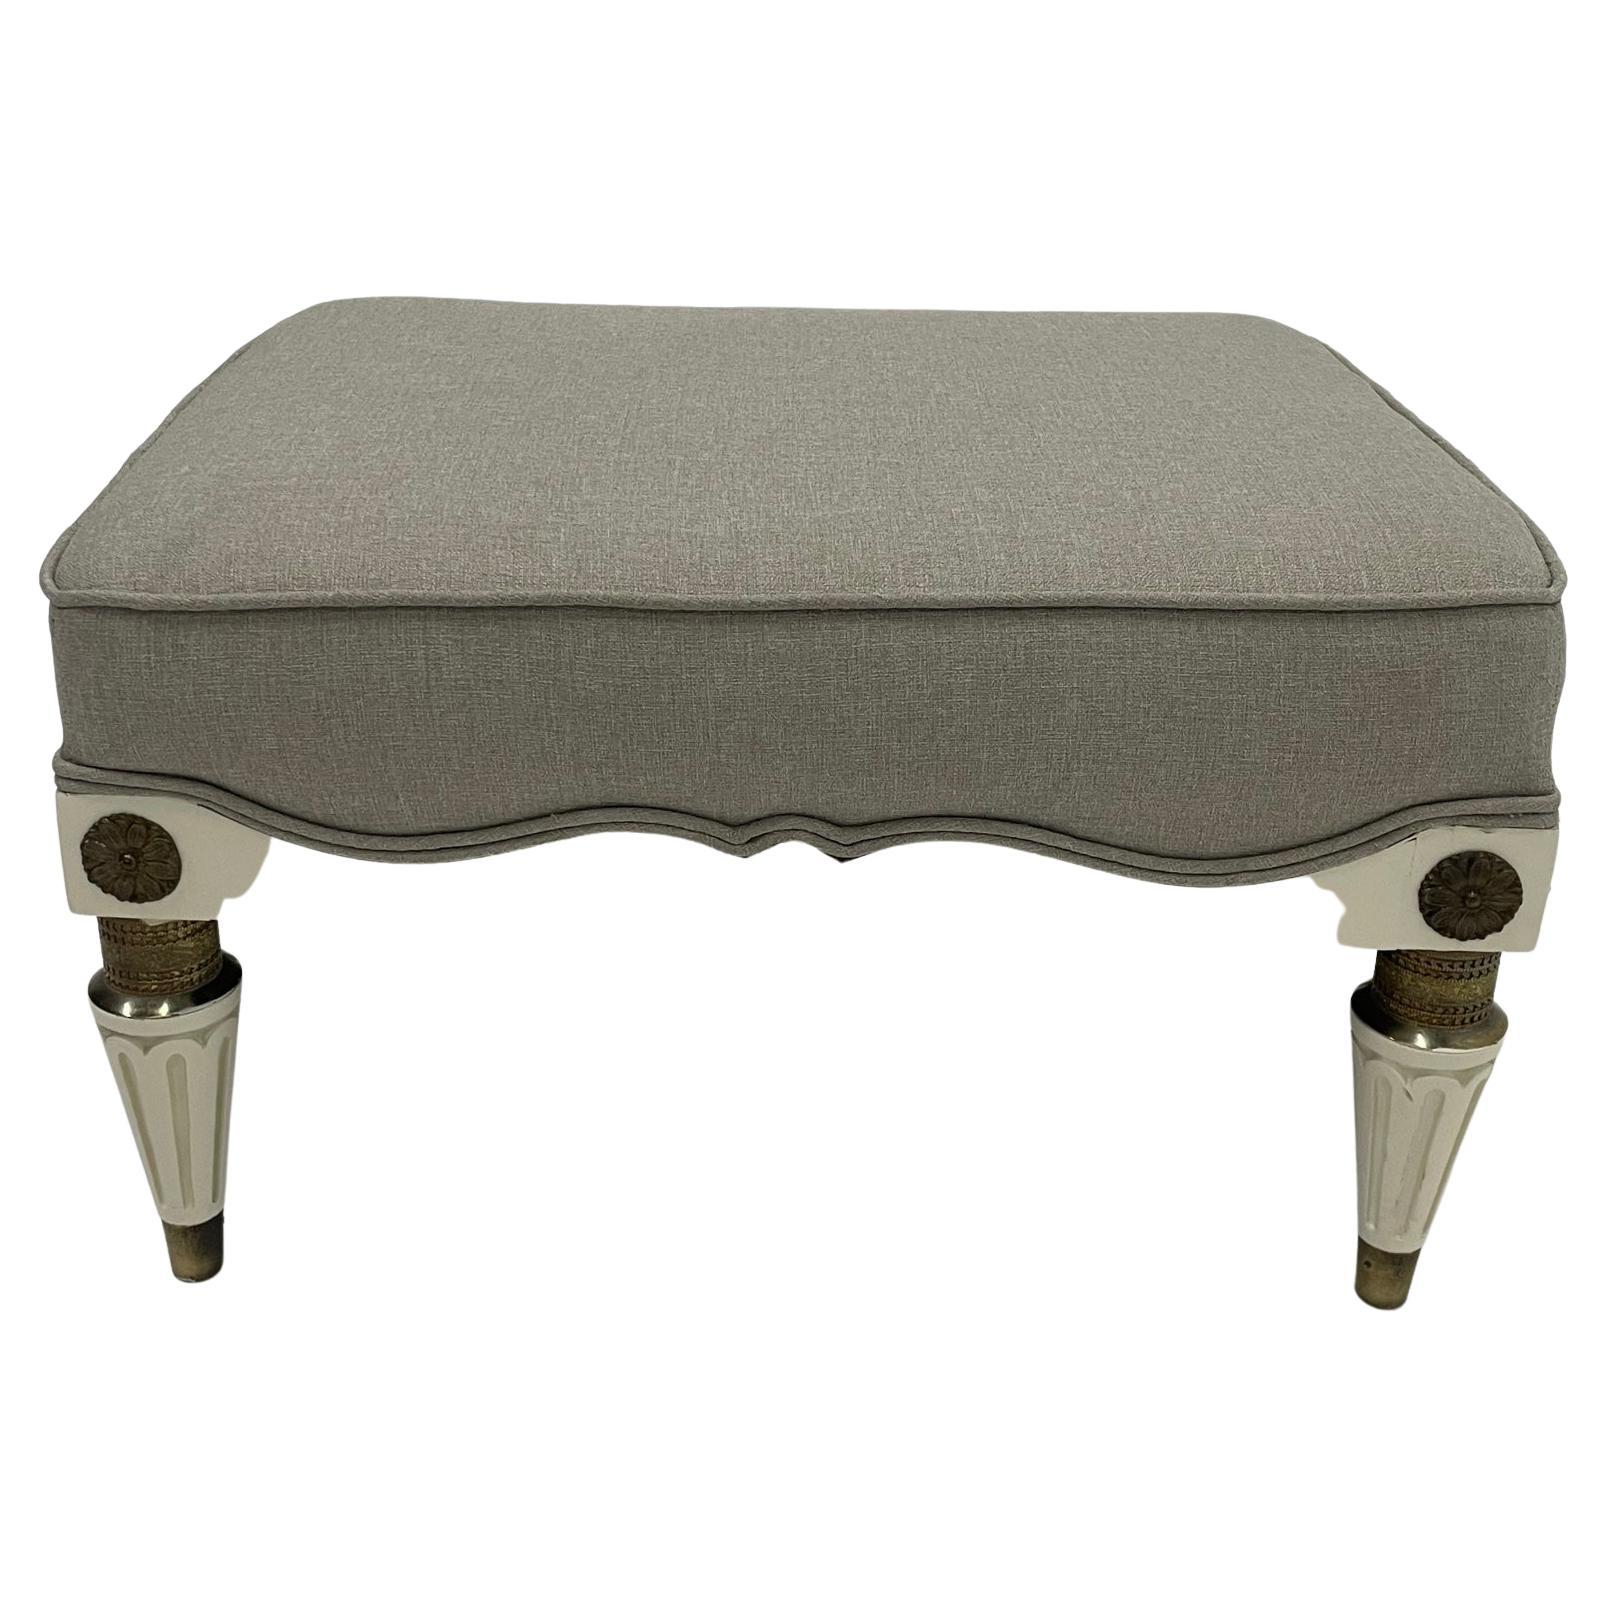 Elegant Maison Jansen White Lacquer and Brass Ottoman with Linen Upholstery